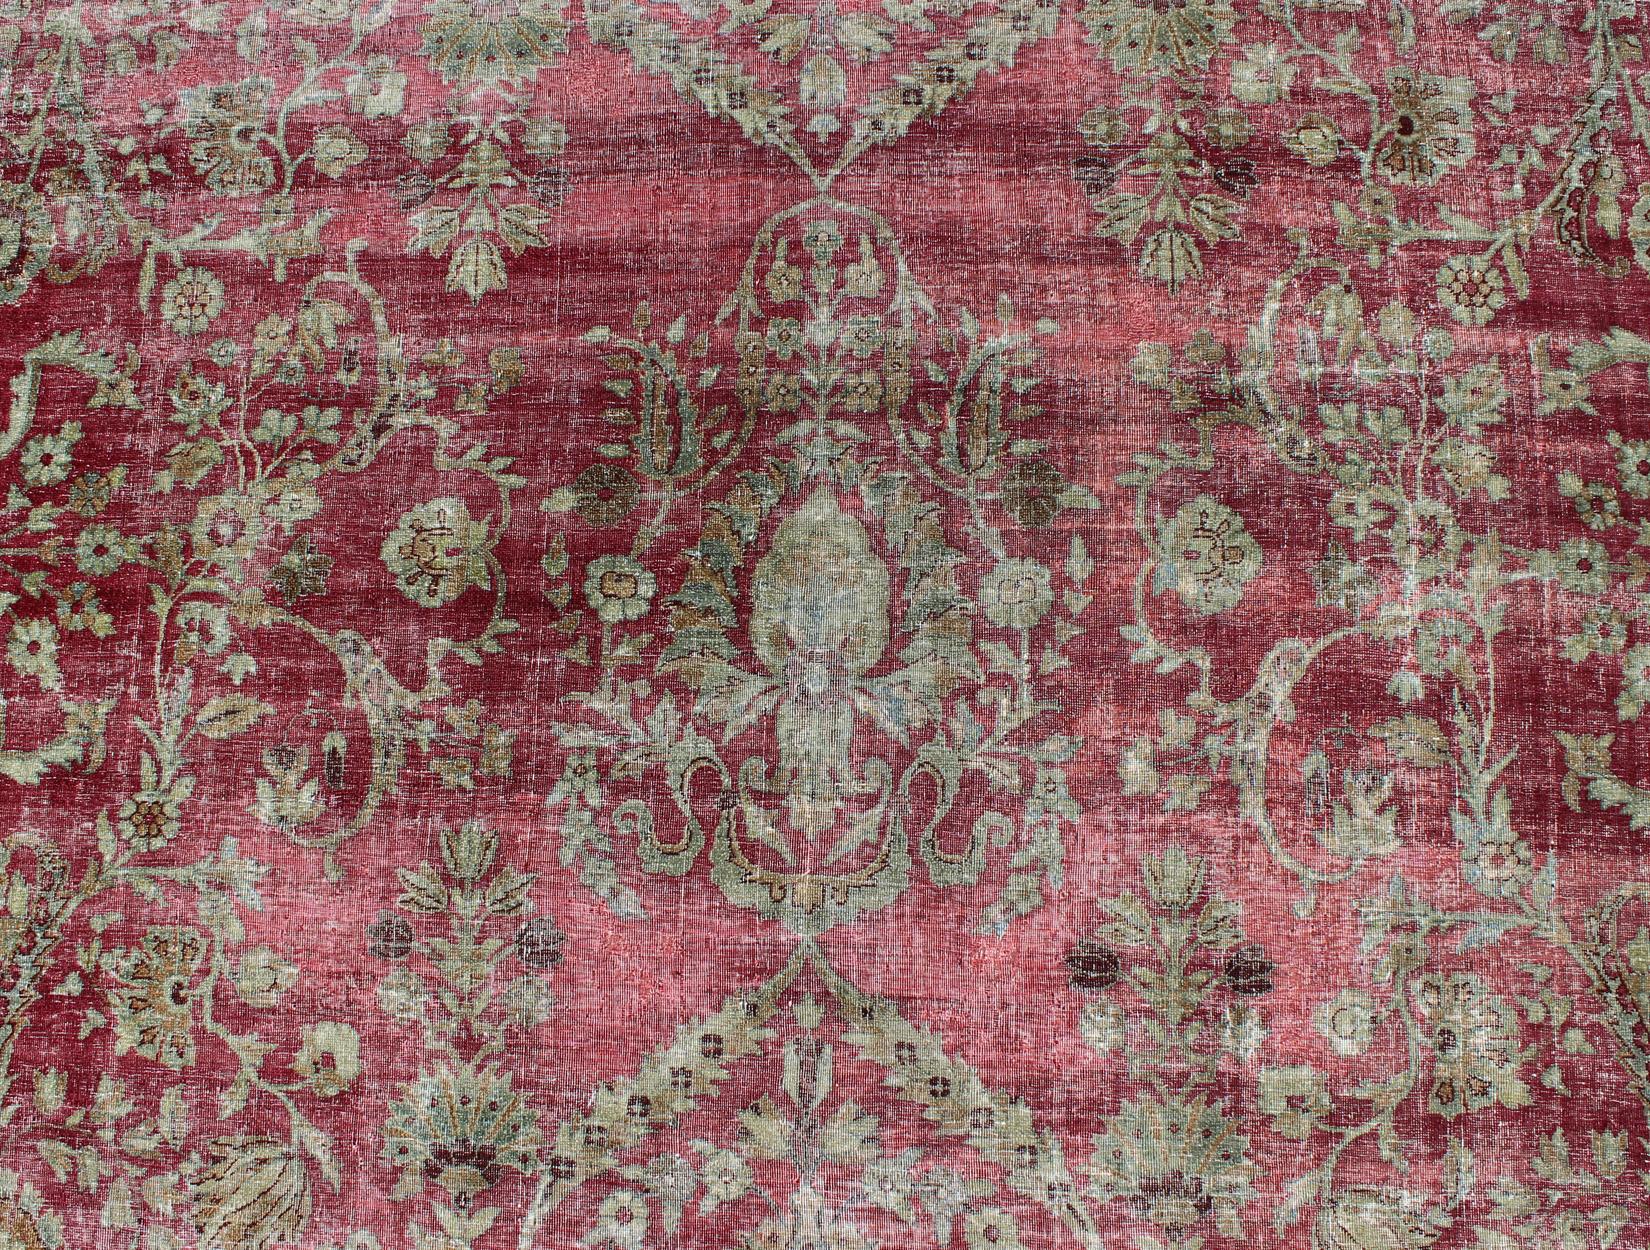 Distressed Antique Persian Lavar Kerman Rug in All-Over Intricate Floral Design For Sale 6